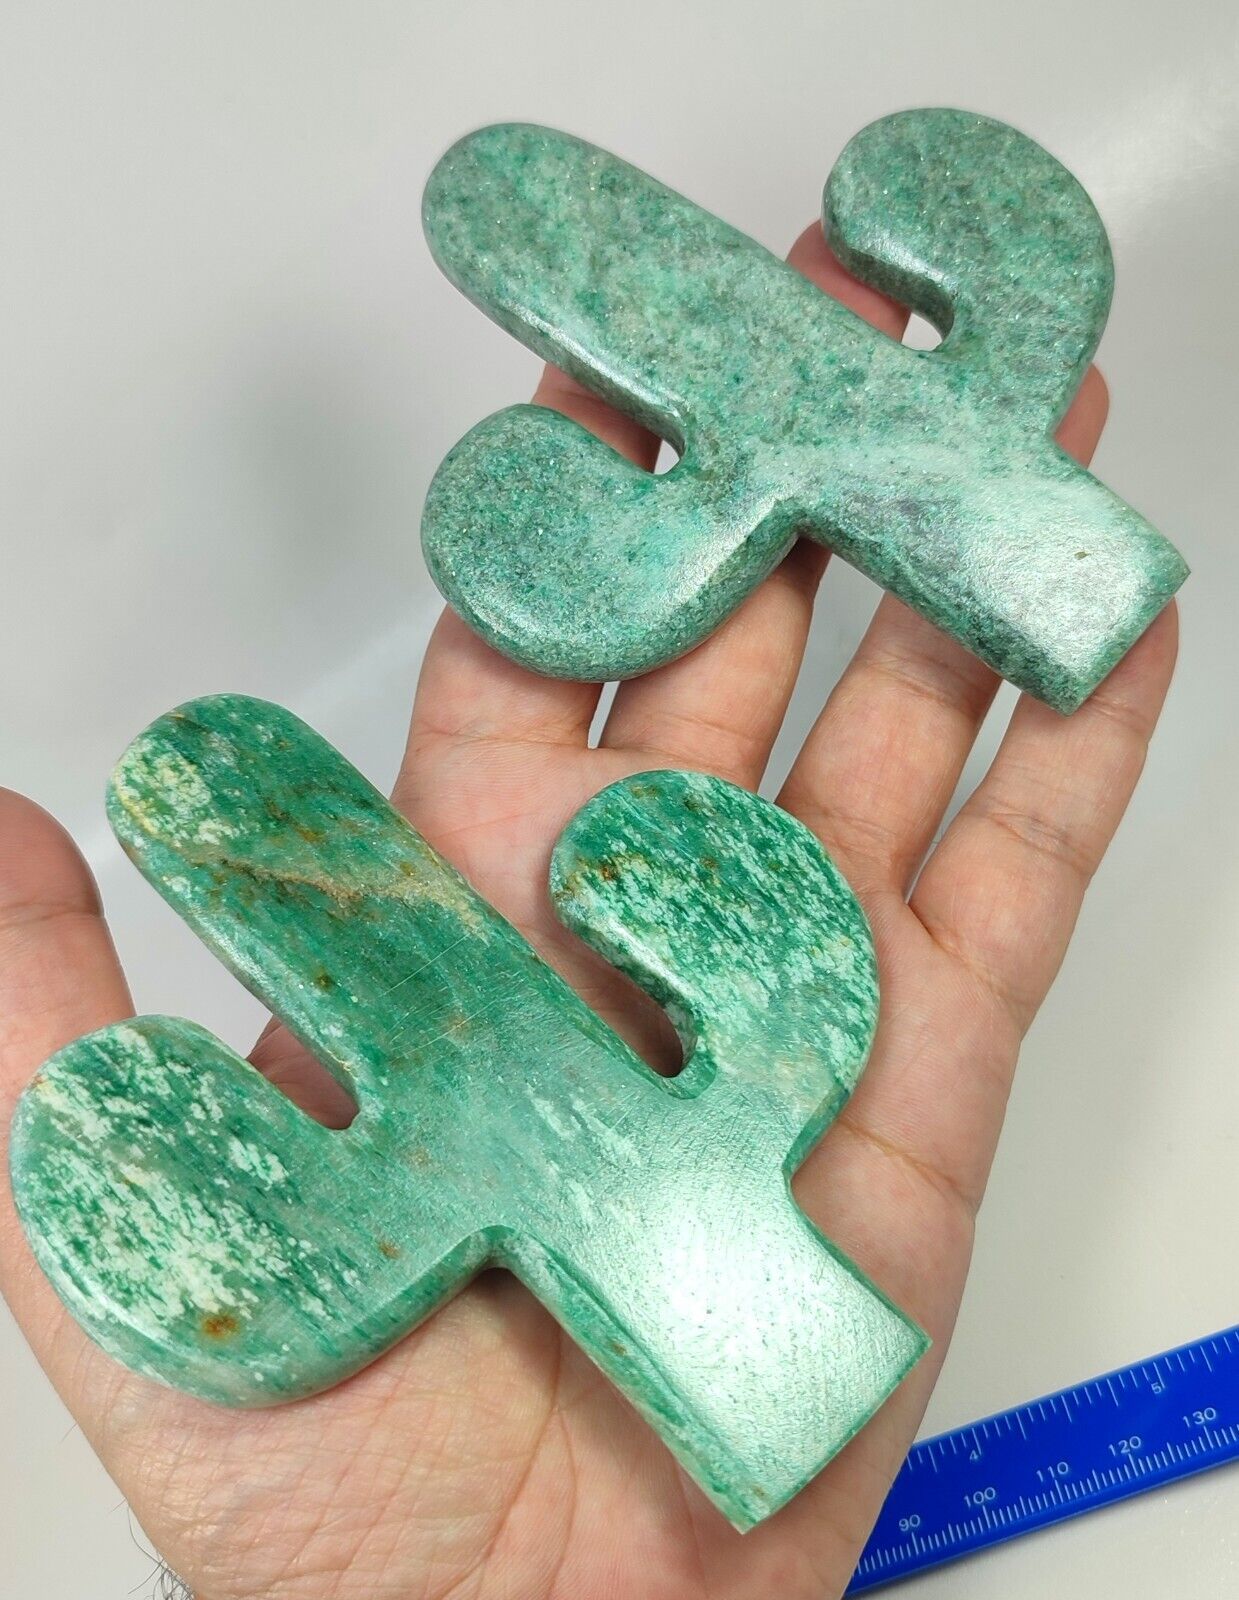 Polished Hand Carved Amazonite Cactus Trees from Karachi/Pakistan 8pcs Crystals